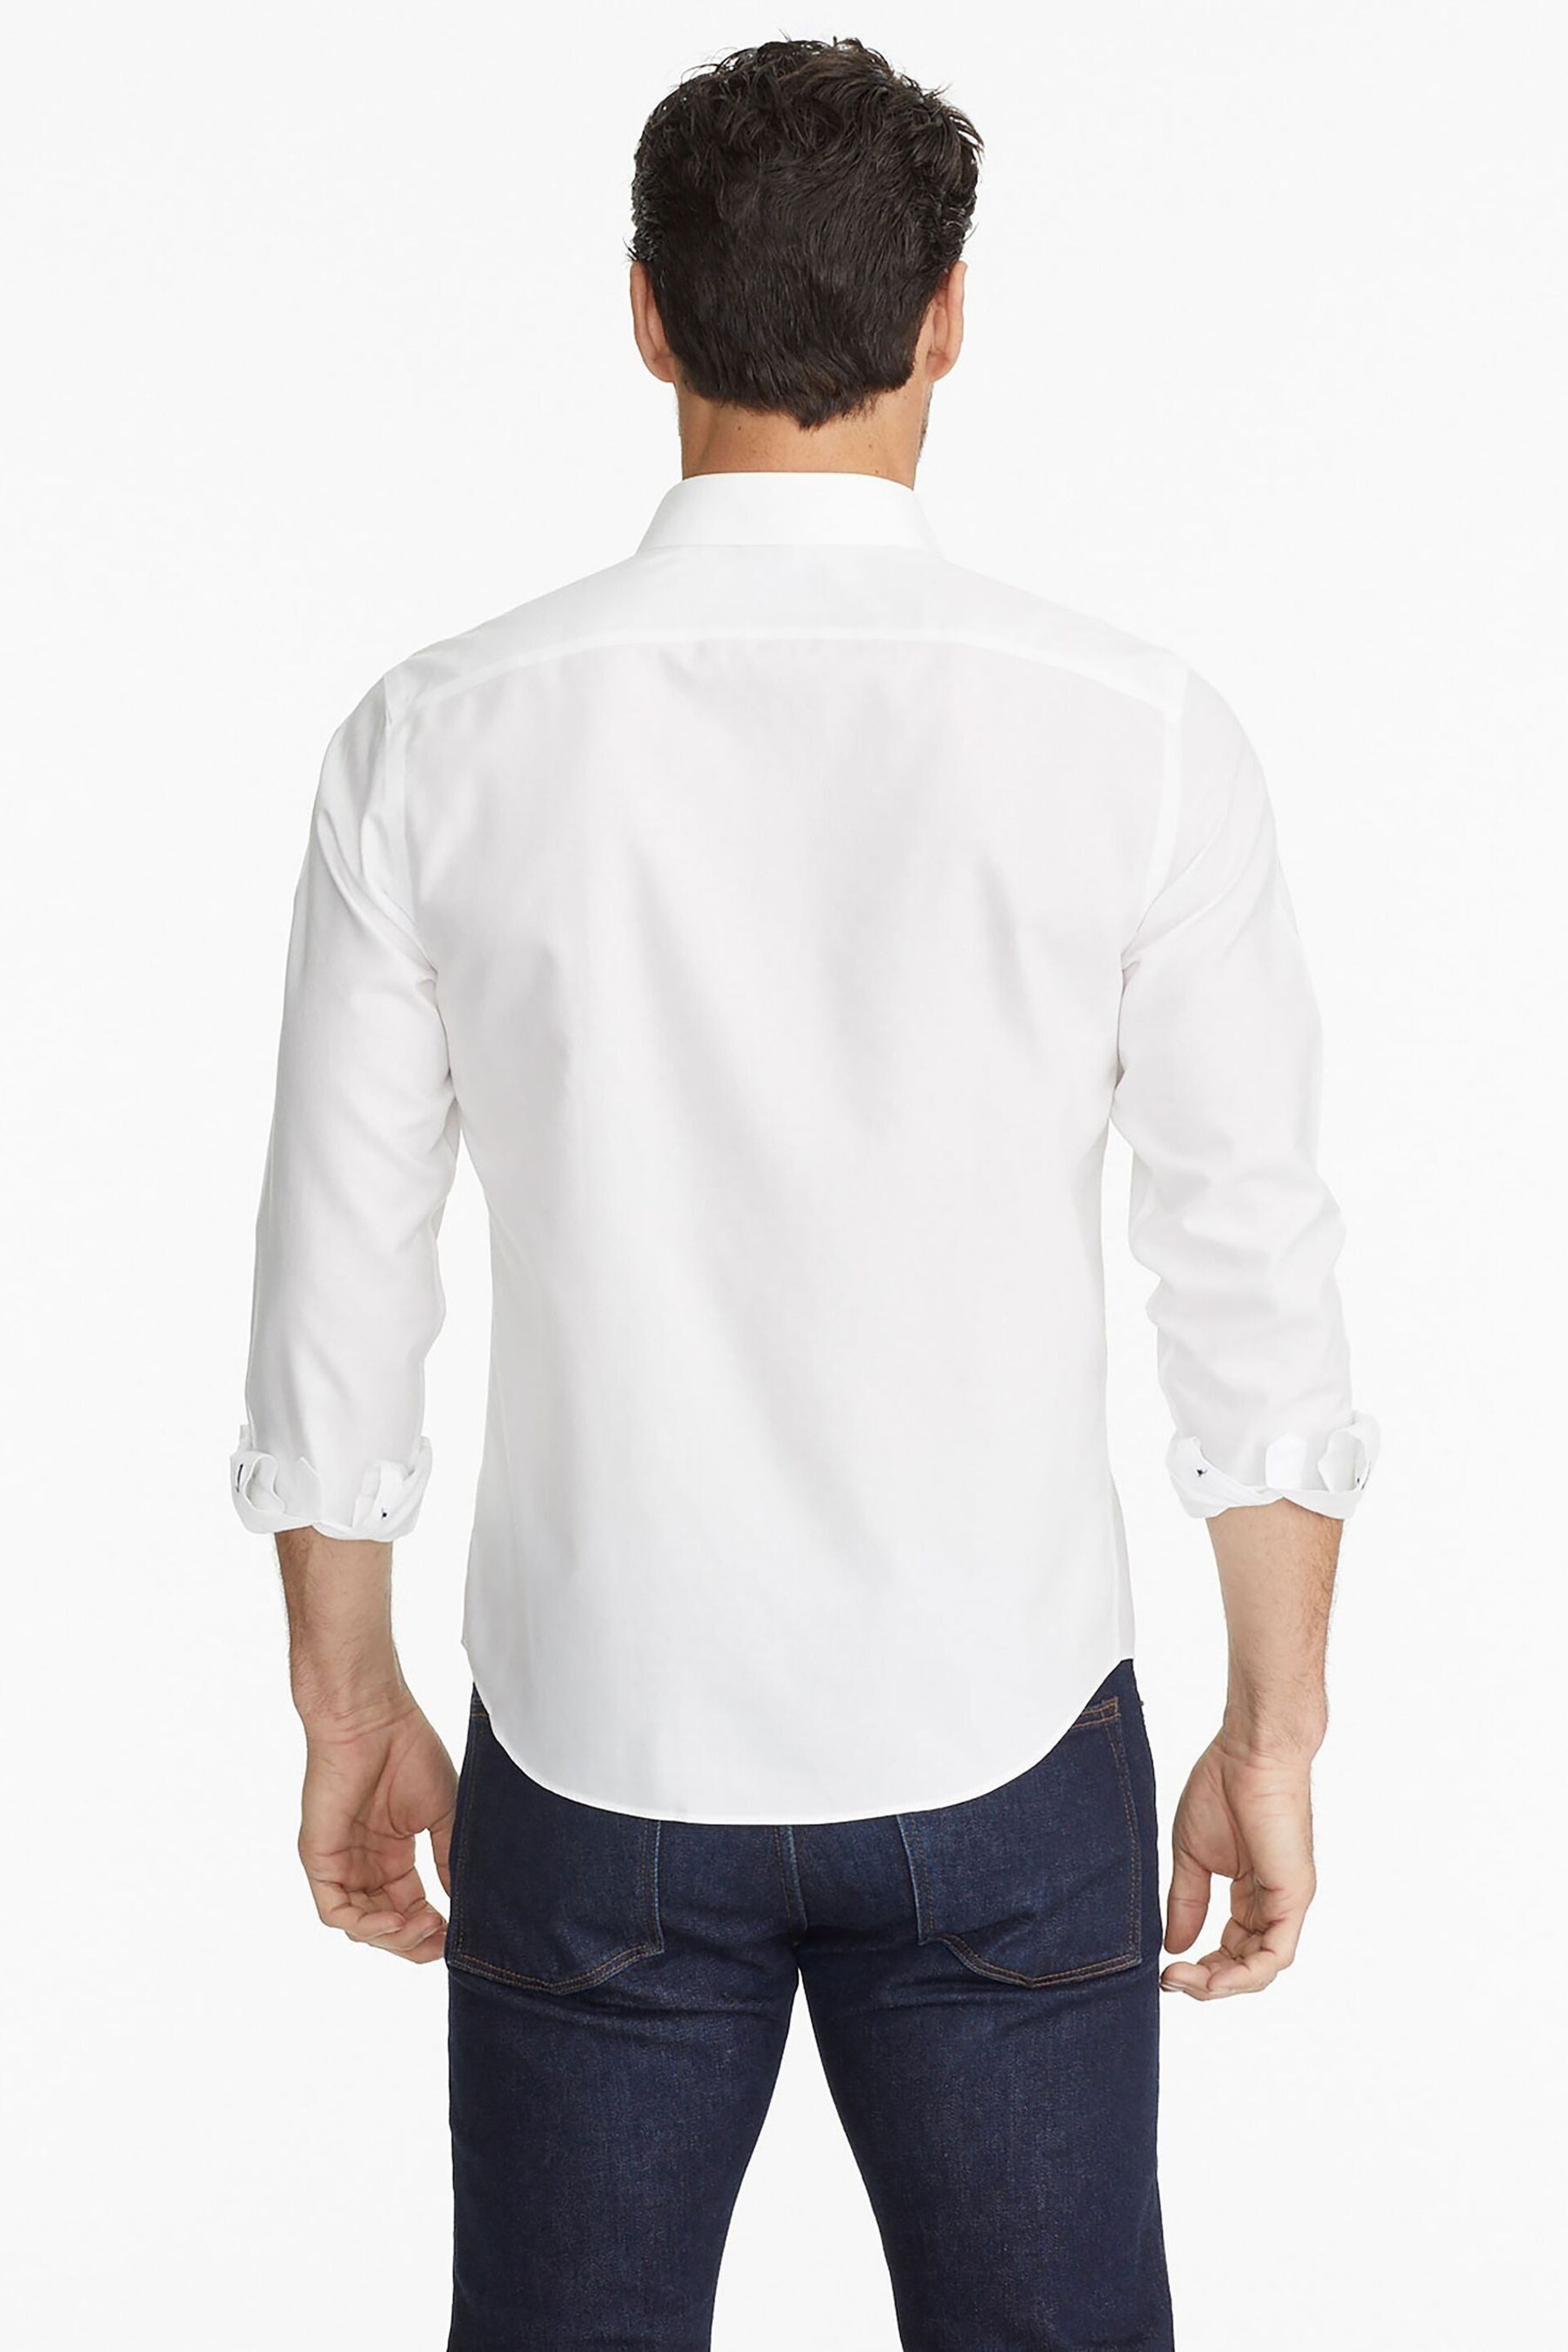 UNTUCKit White Off Wrinkle-Free Relaxed Fit Las Cases Shirt - Image 2 of 3